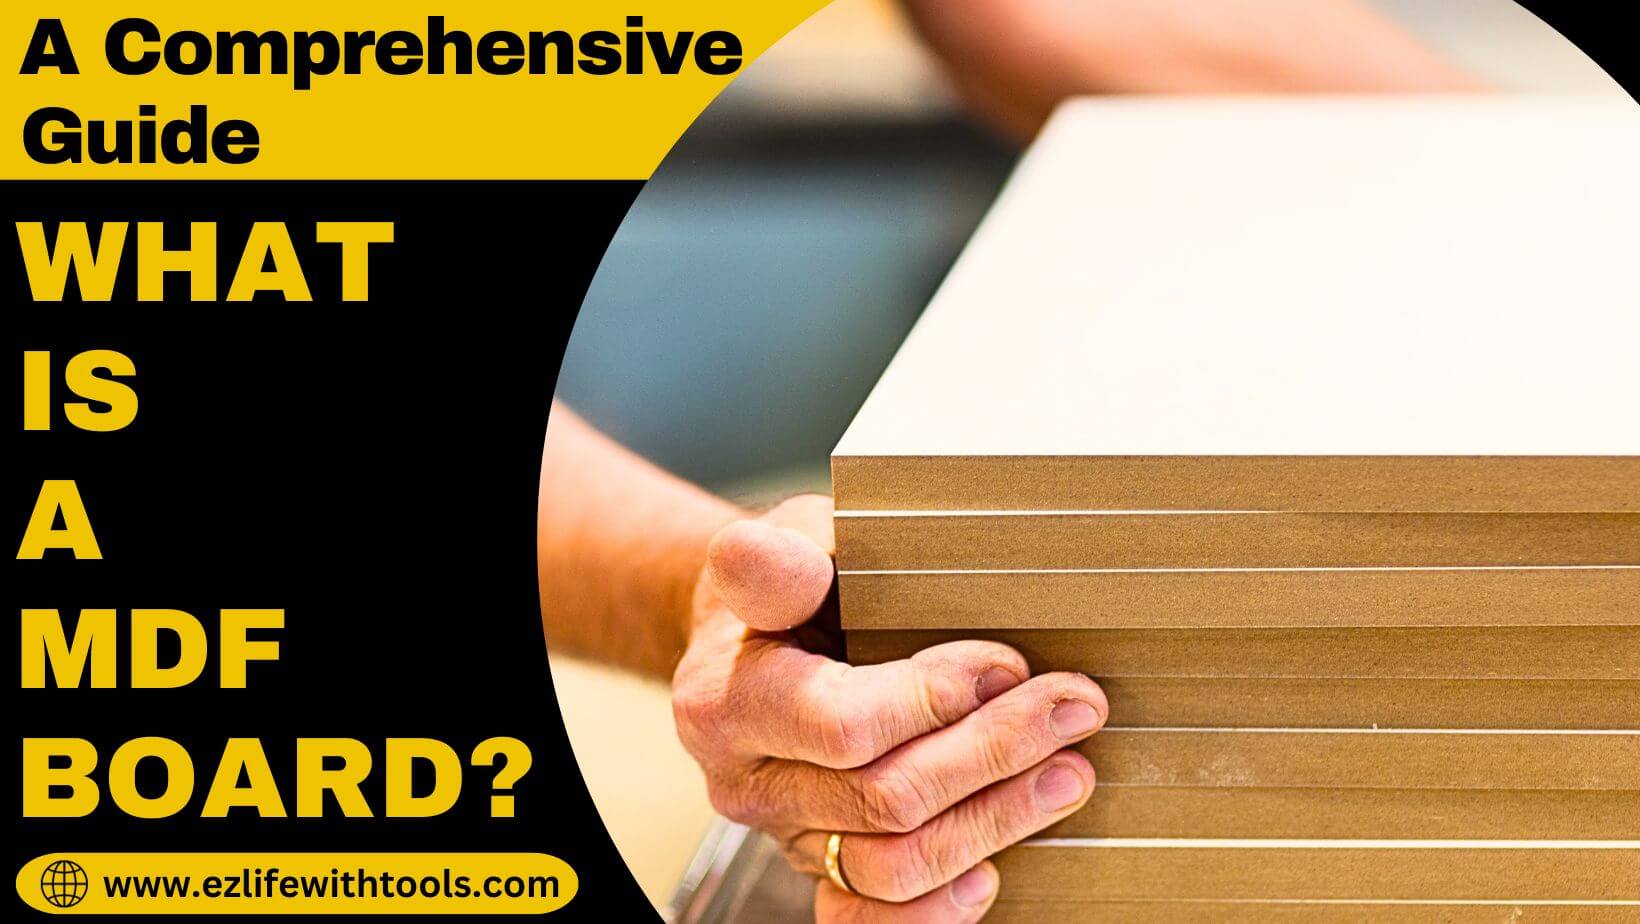 What is a MDF Board